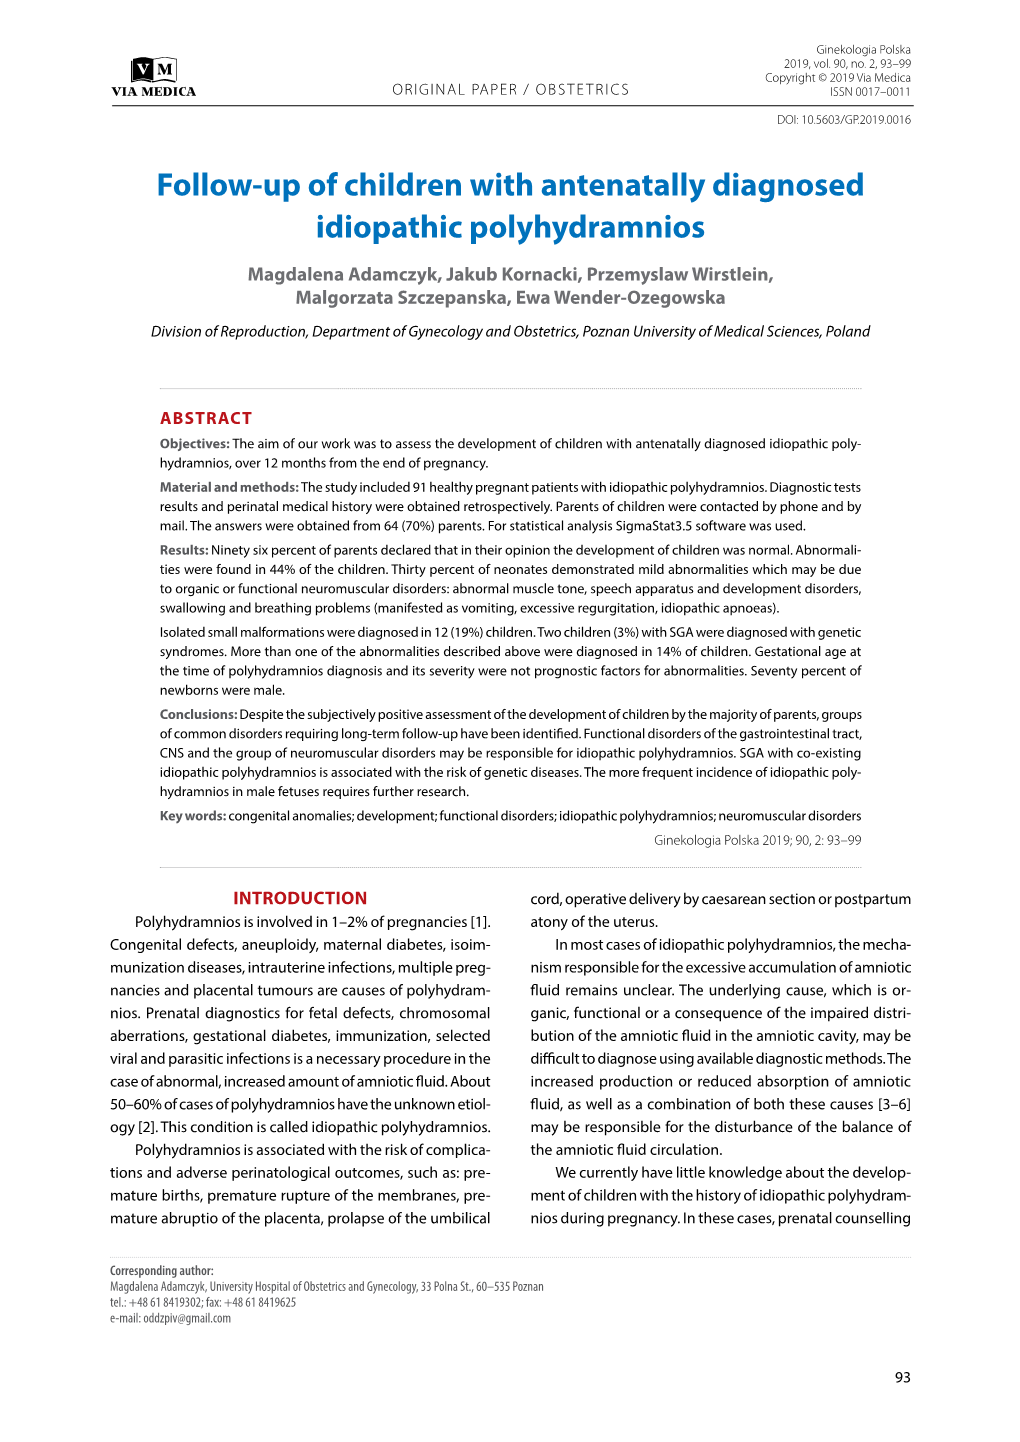 Follow-Up of Children with Antenatally Diagnosed Idiopathic Polyhydramnios